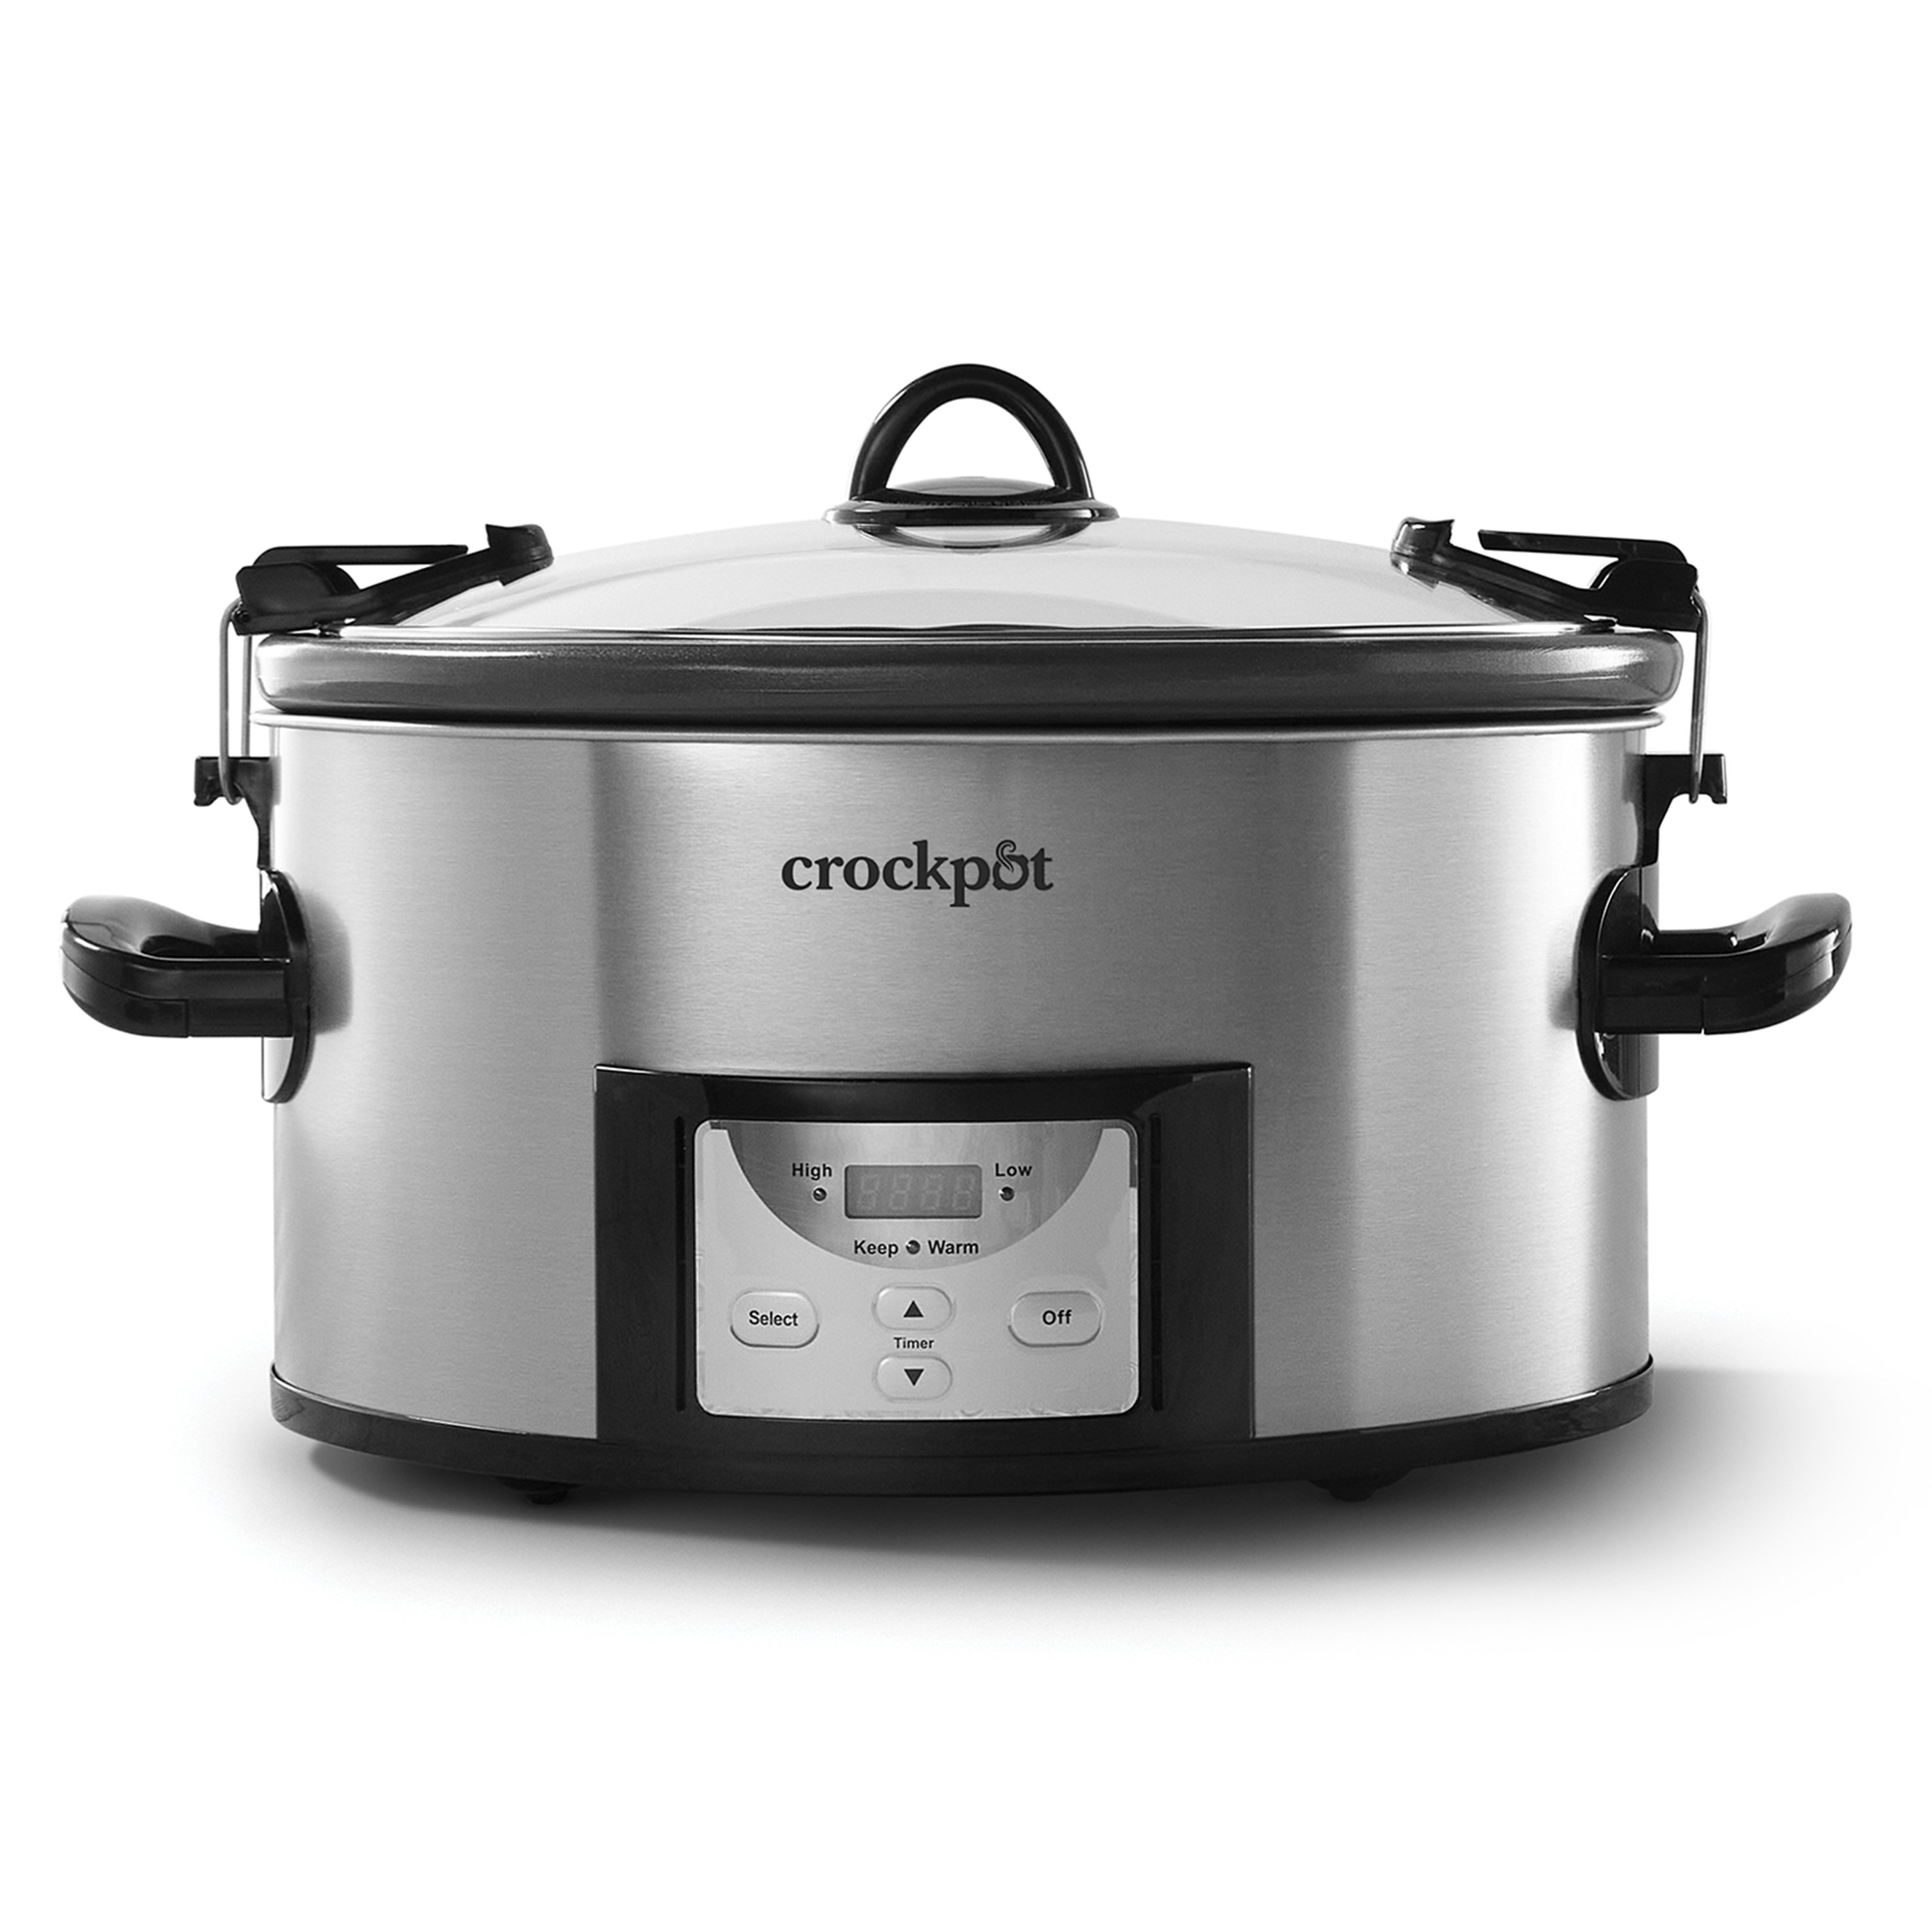 Disney - 7 Quart Slow Cooker factory direct and quick delivery